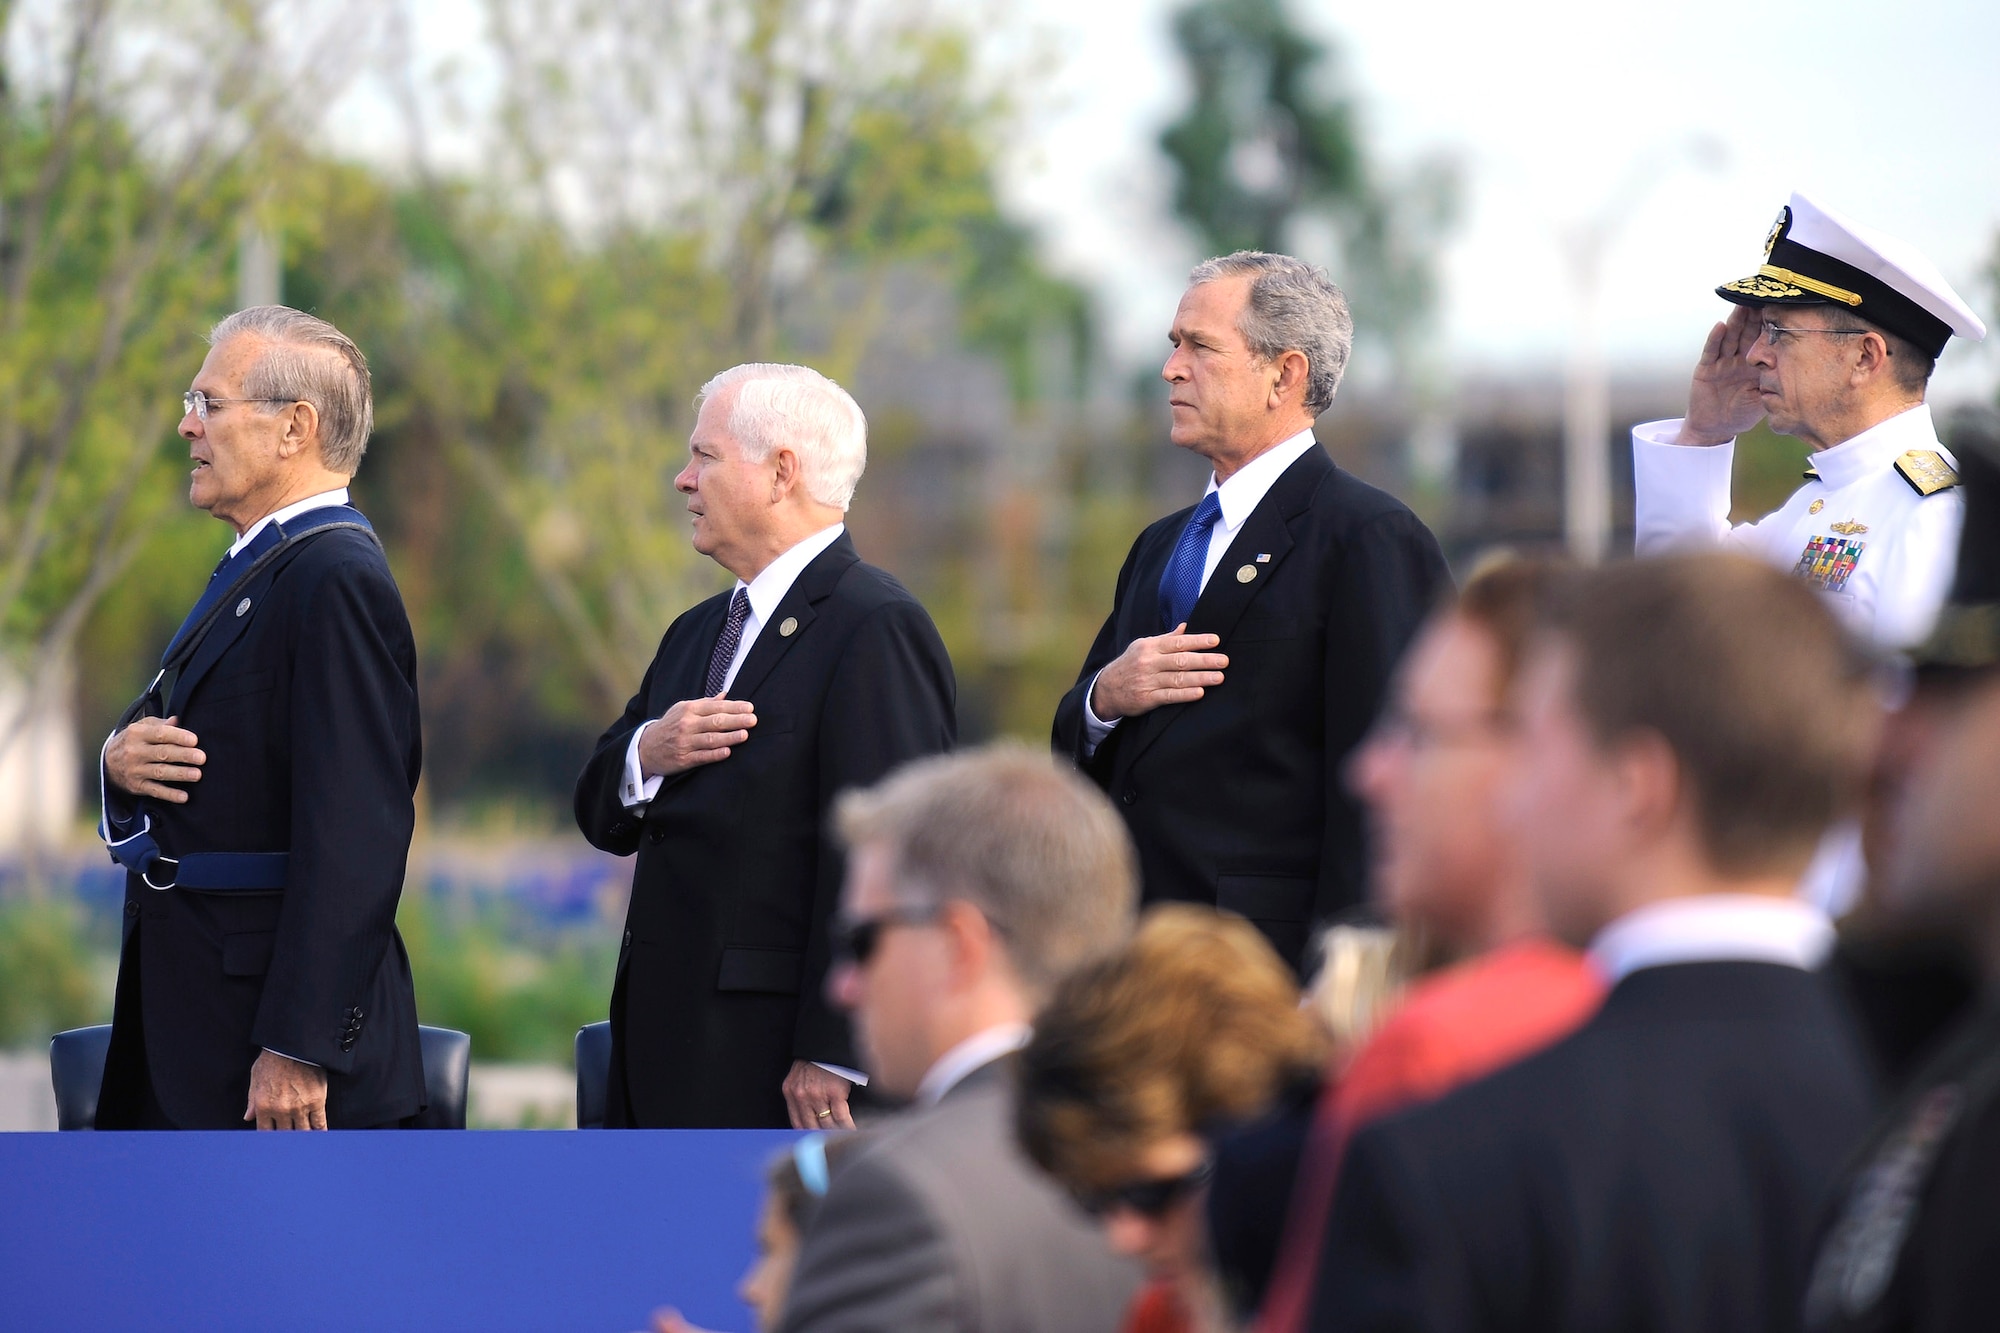 President George W. Bush, Secretary of Defense Robert M. Gates and former Secretary of Defense Donald Rumsfeld stand as the national anthem plays at the Pentagon Memorial dedication ceremony Sept. 11 at Alexandria, Va. The national memorial is the first to be dedicated to those killed at the Pentagon on Sept. 11, 2001. The site contains 184 inscribed memorial units honoring the 59 people aboard American Airlines Flight 77 and the 125 in the building who lost their lives that day. (Defense Department photo/Tech. Sgt. Jerry Morrison)